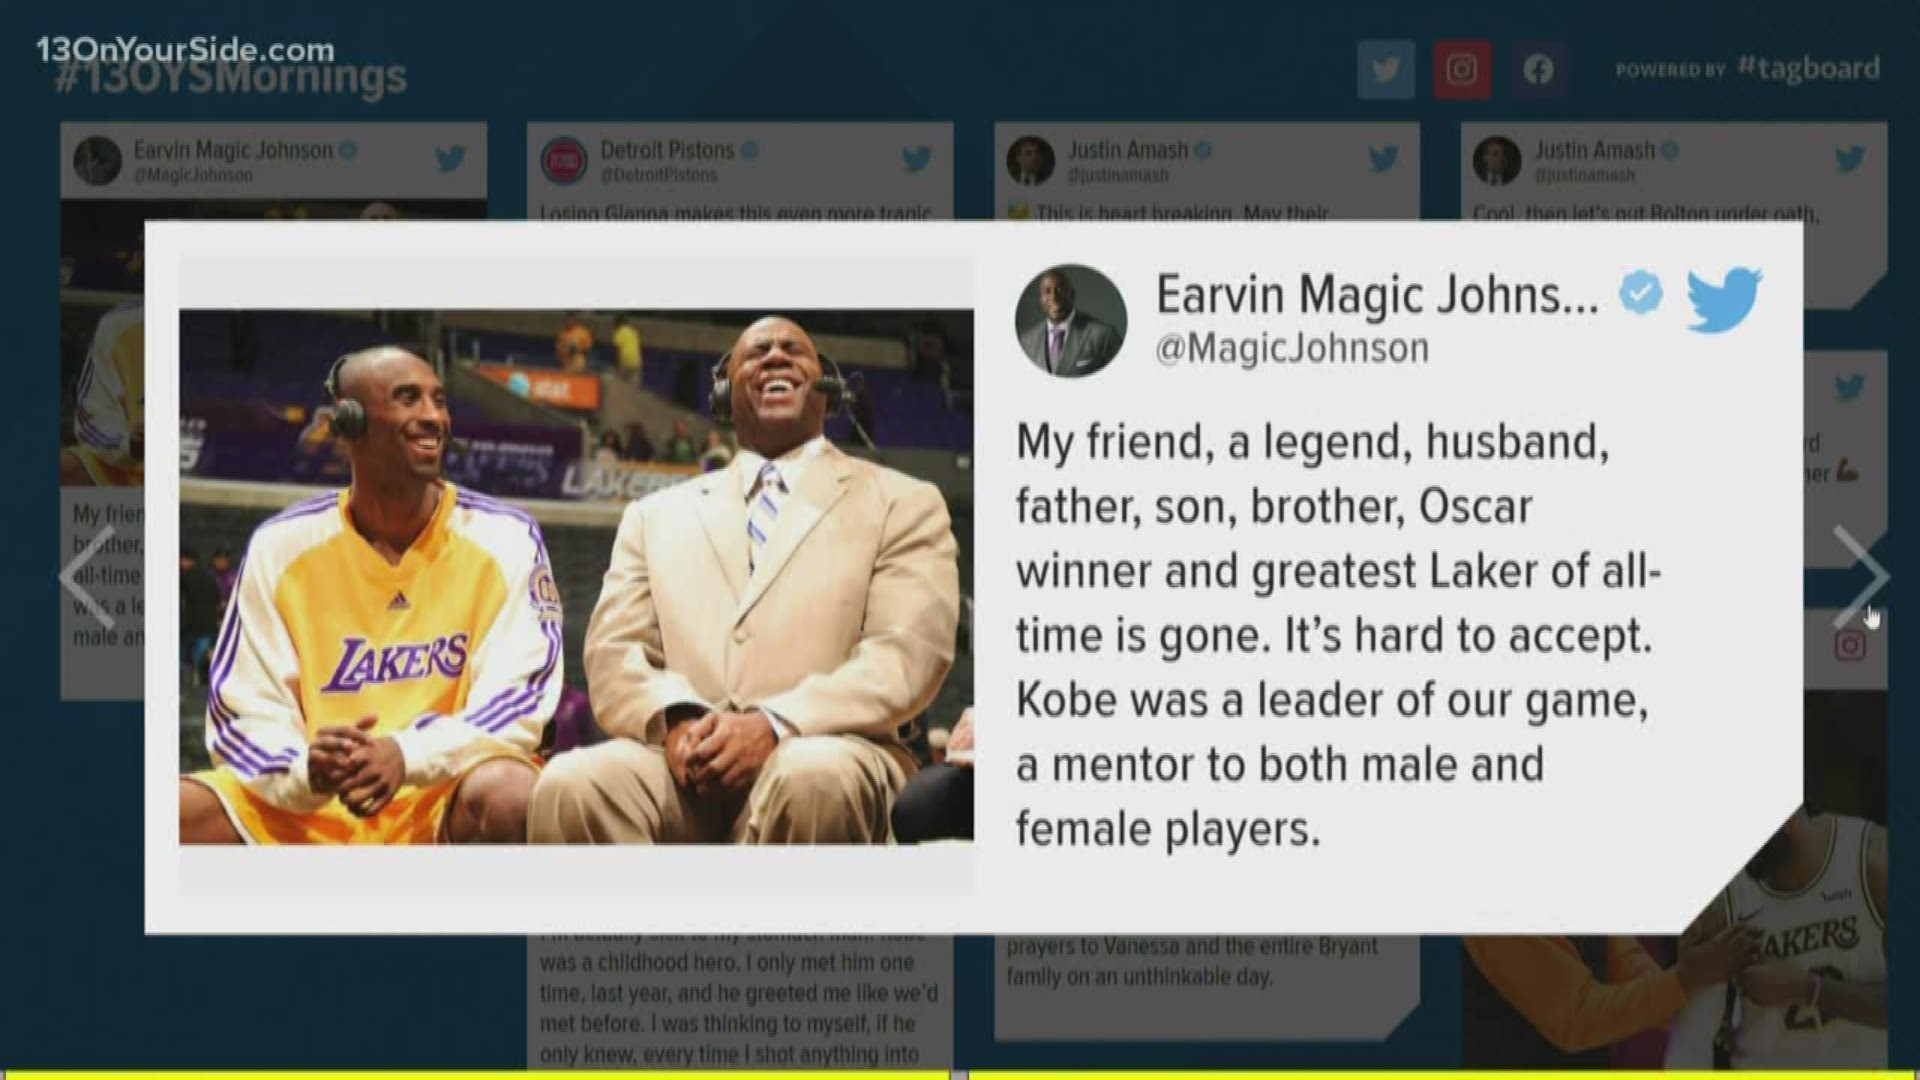 Michigan athletes are reacting to the news that Kobe Bryant died in a helicopter crash Sunday.